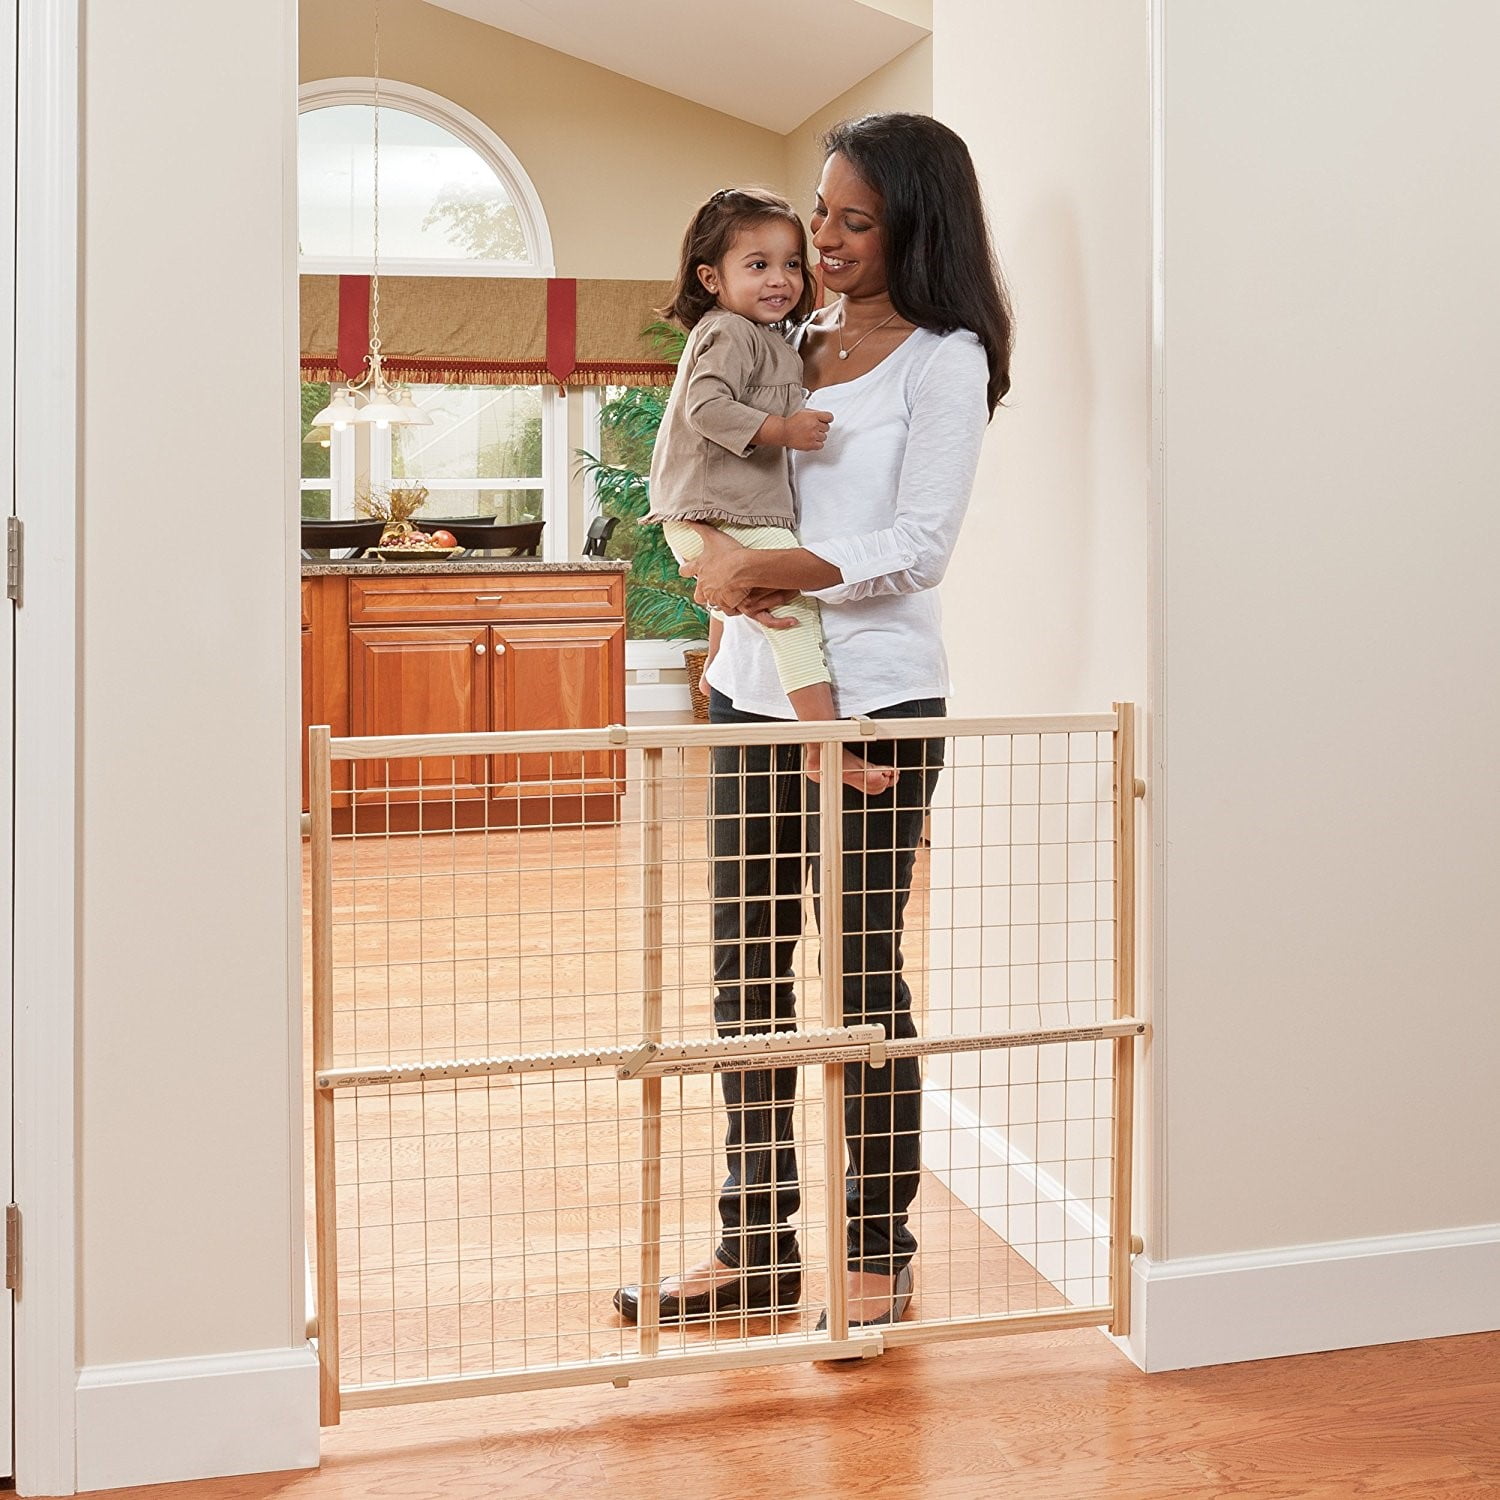 Portable Folding Mesh Magic Gate Baby Gate Stair Gate Easy Install Anywhere 43.3x28.3 Black Color Gate for Dog/Pet/Baby Baby Safety Dog Gate ZENDIX Magic Gate for Dog Hooks & Poles Included